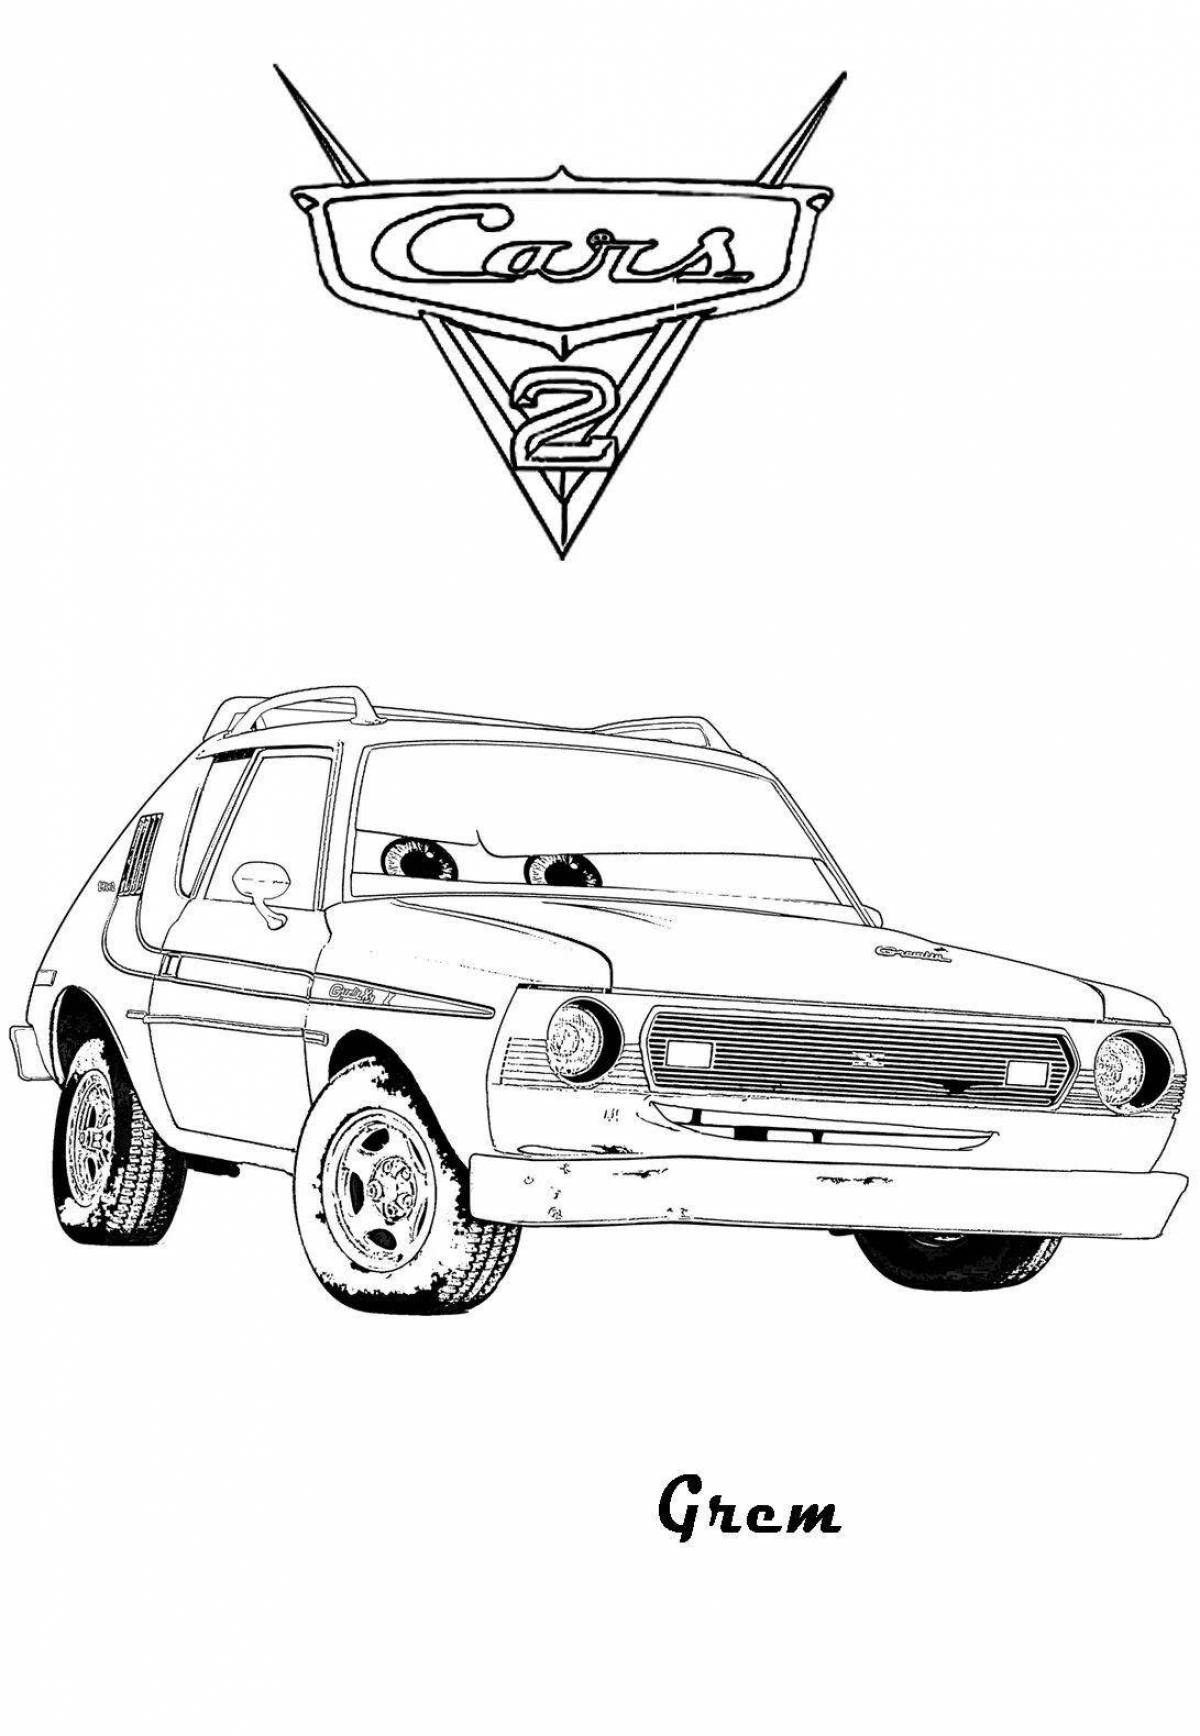 Bright cars from standoff 2 coloring book